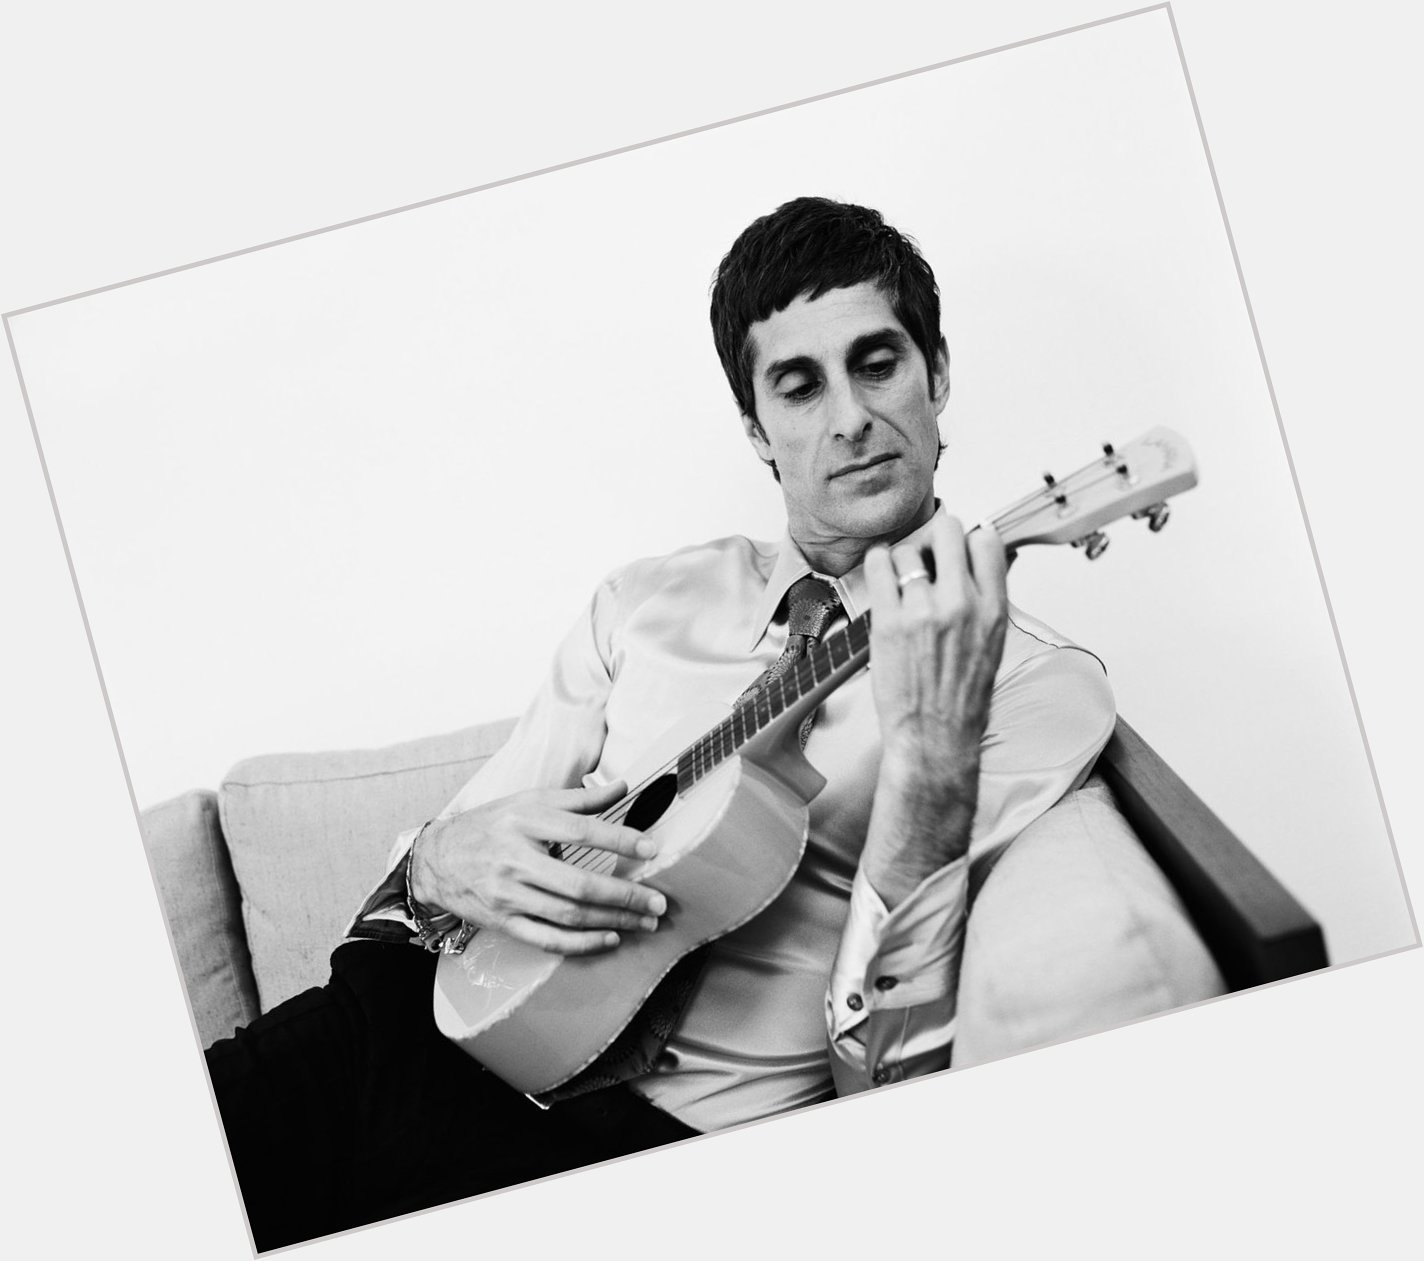 Happy 58th Birthday to Peretz Bernstein, or as we better know him now, the great Perry Farrell! 